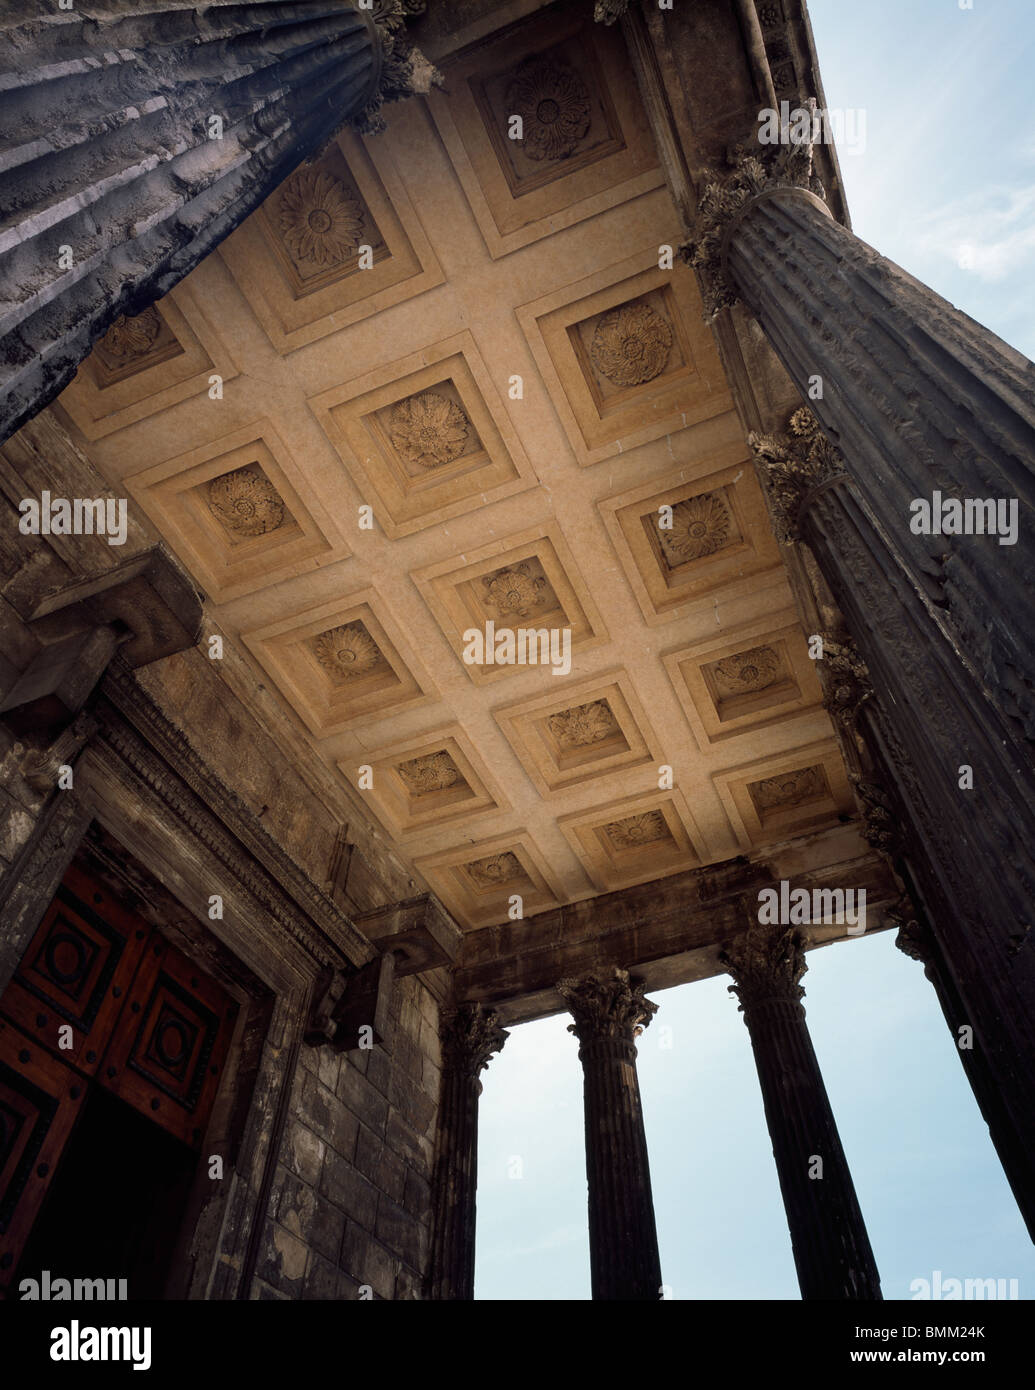 Maison Carree Nimes France Portico Interior With Coffering Rosettes And Corinthian Capitals 1st Century Ad Roman Stock Photo Alamy